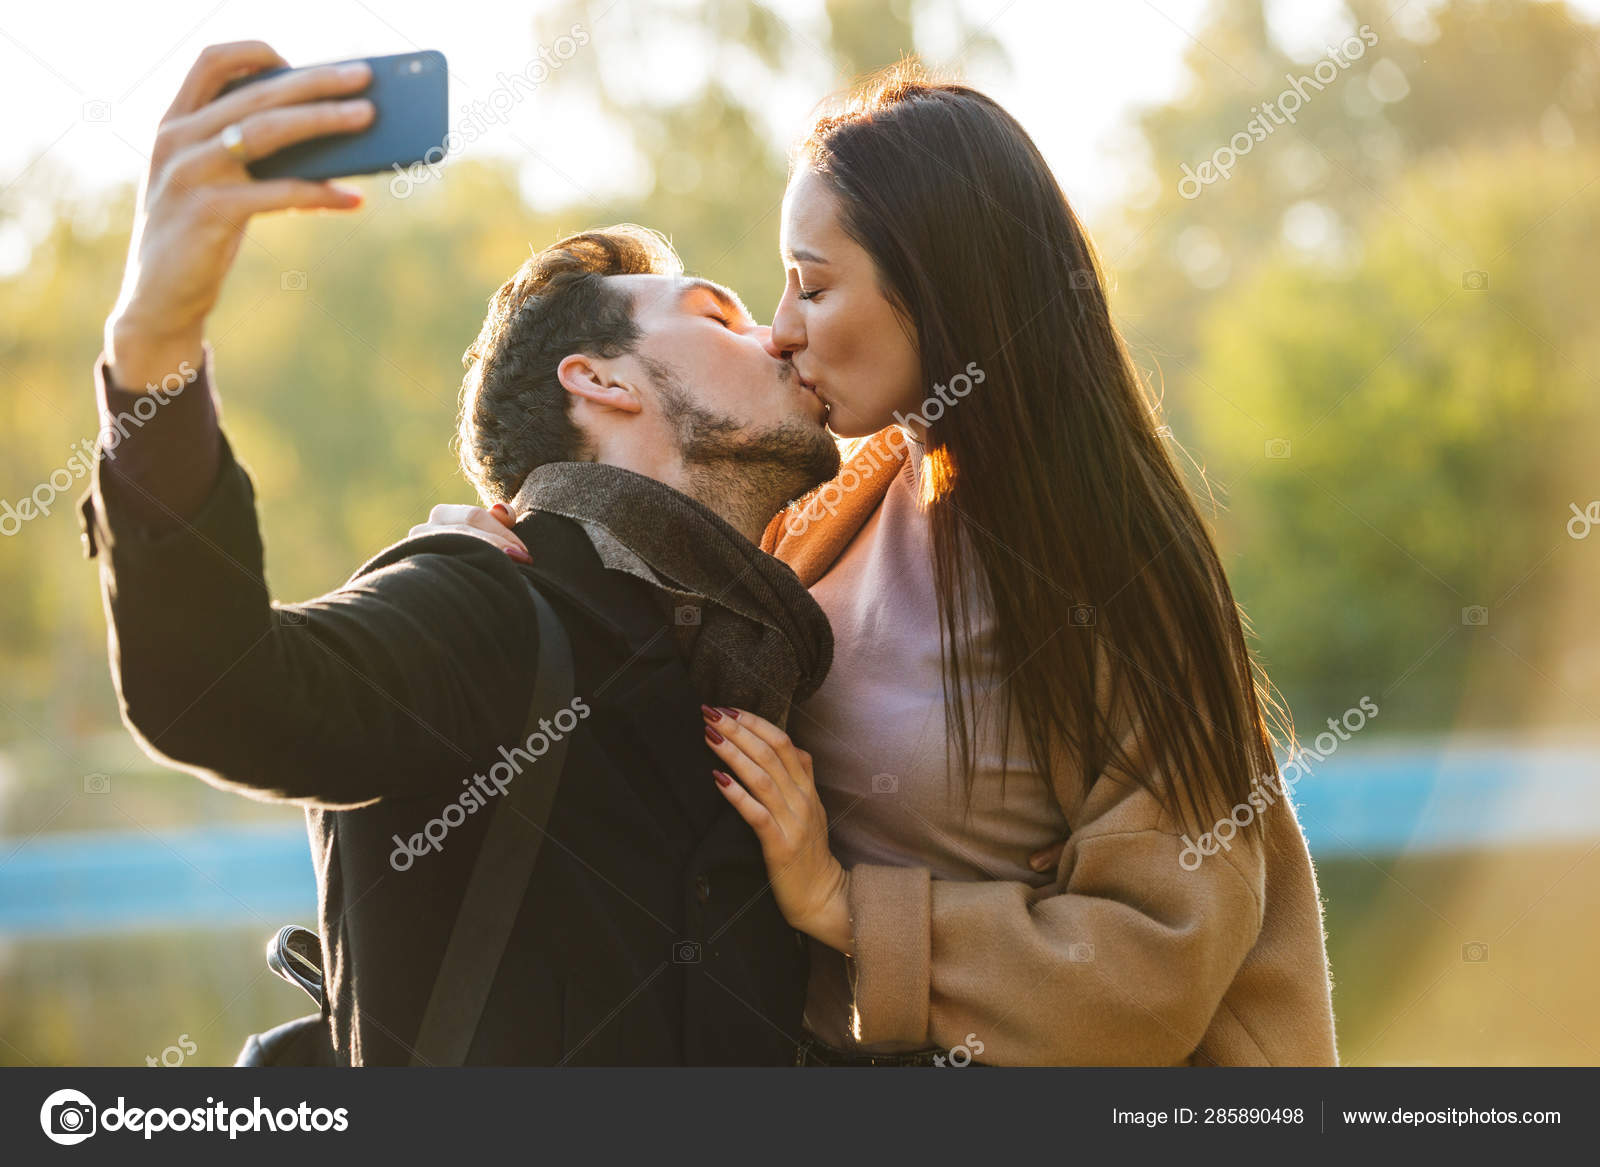 Happy Young Couple Kissing Pose Selfie Stock Photo 1019057590 | Shutterstock